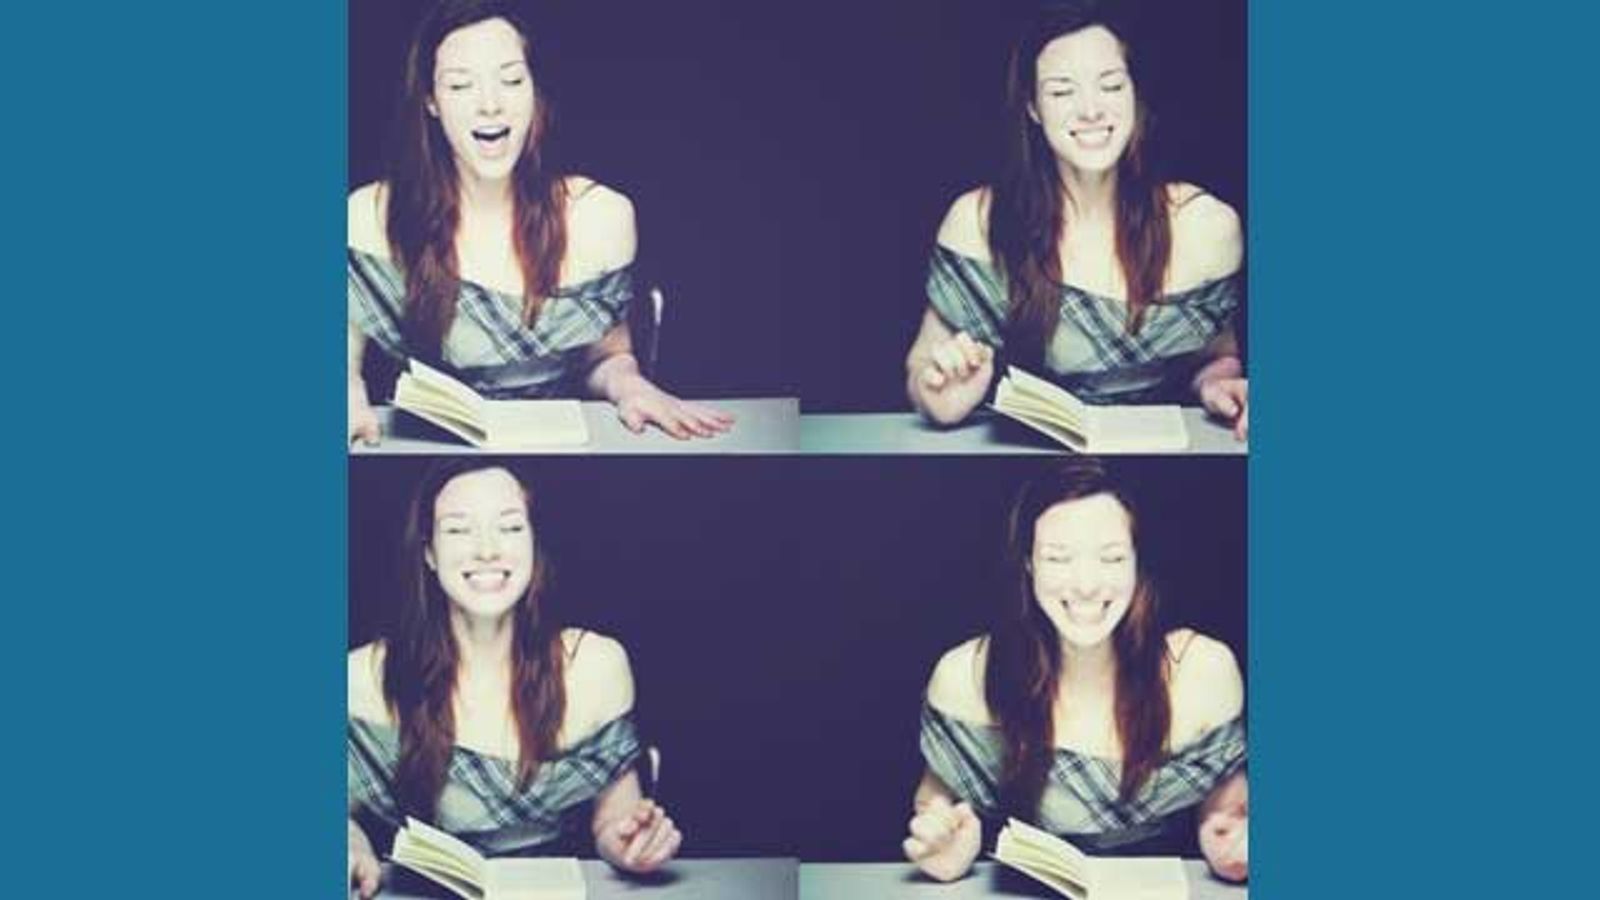 Stoya Reads While Unseen Hands Have Their Way